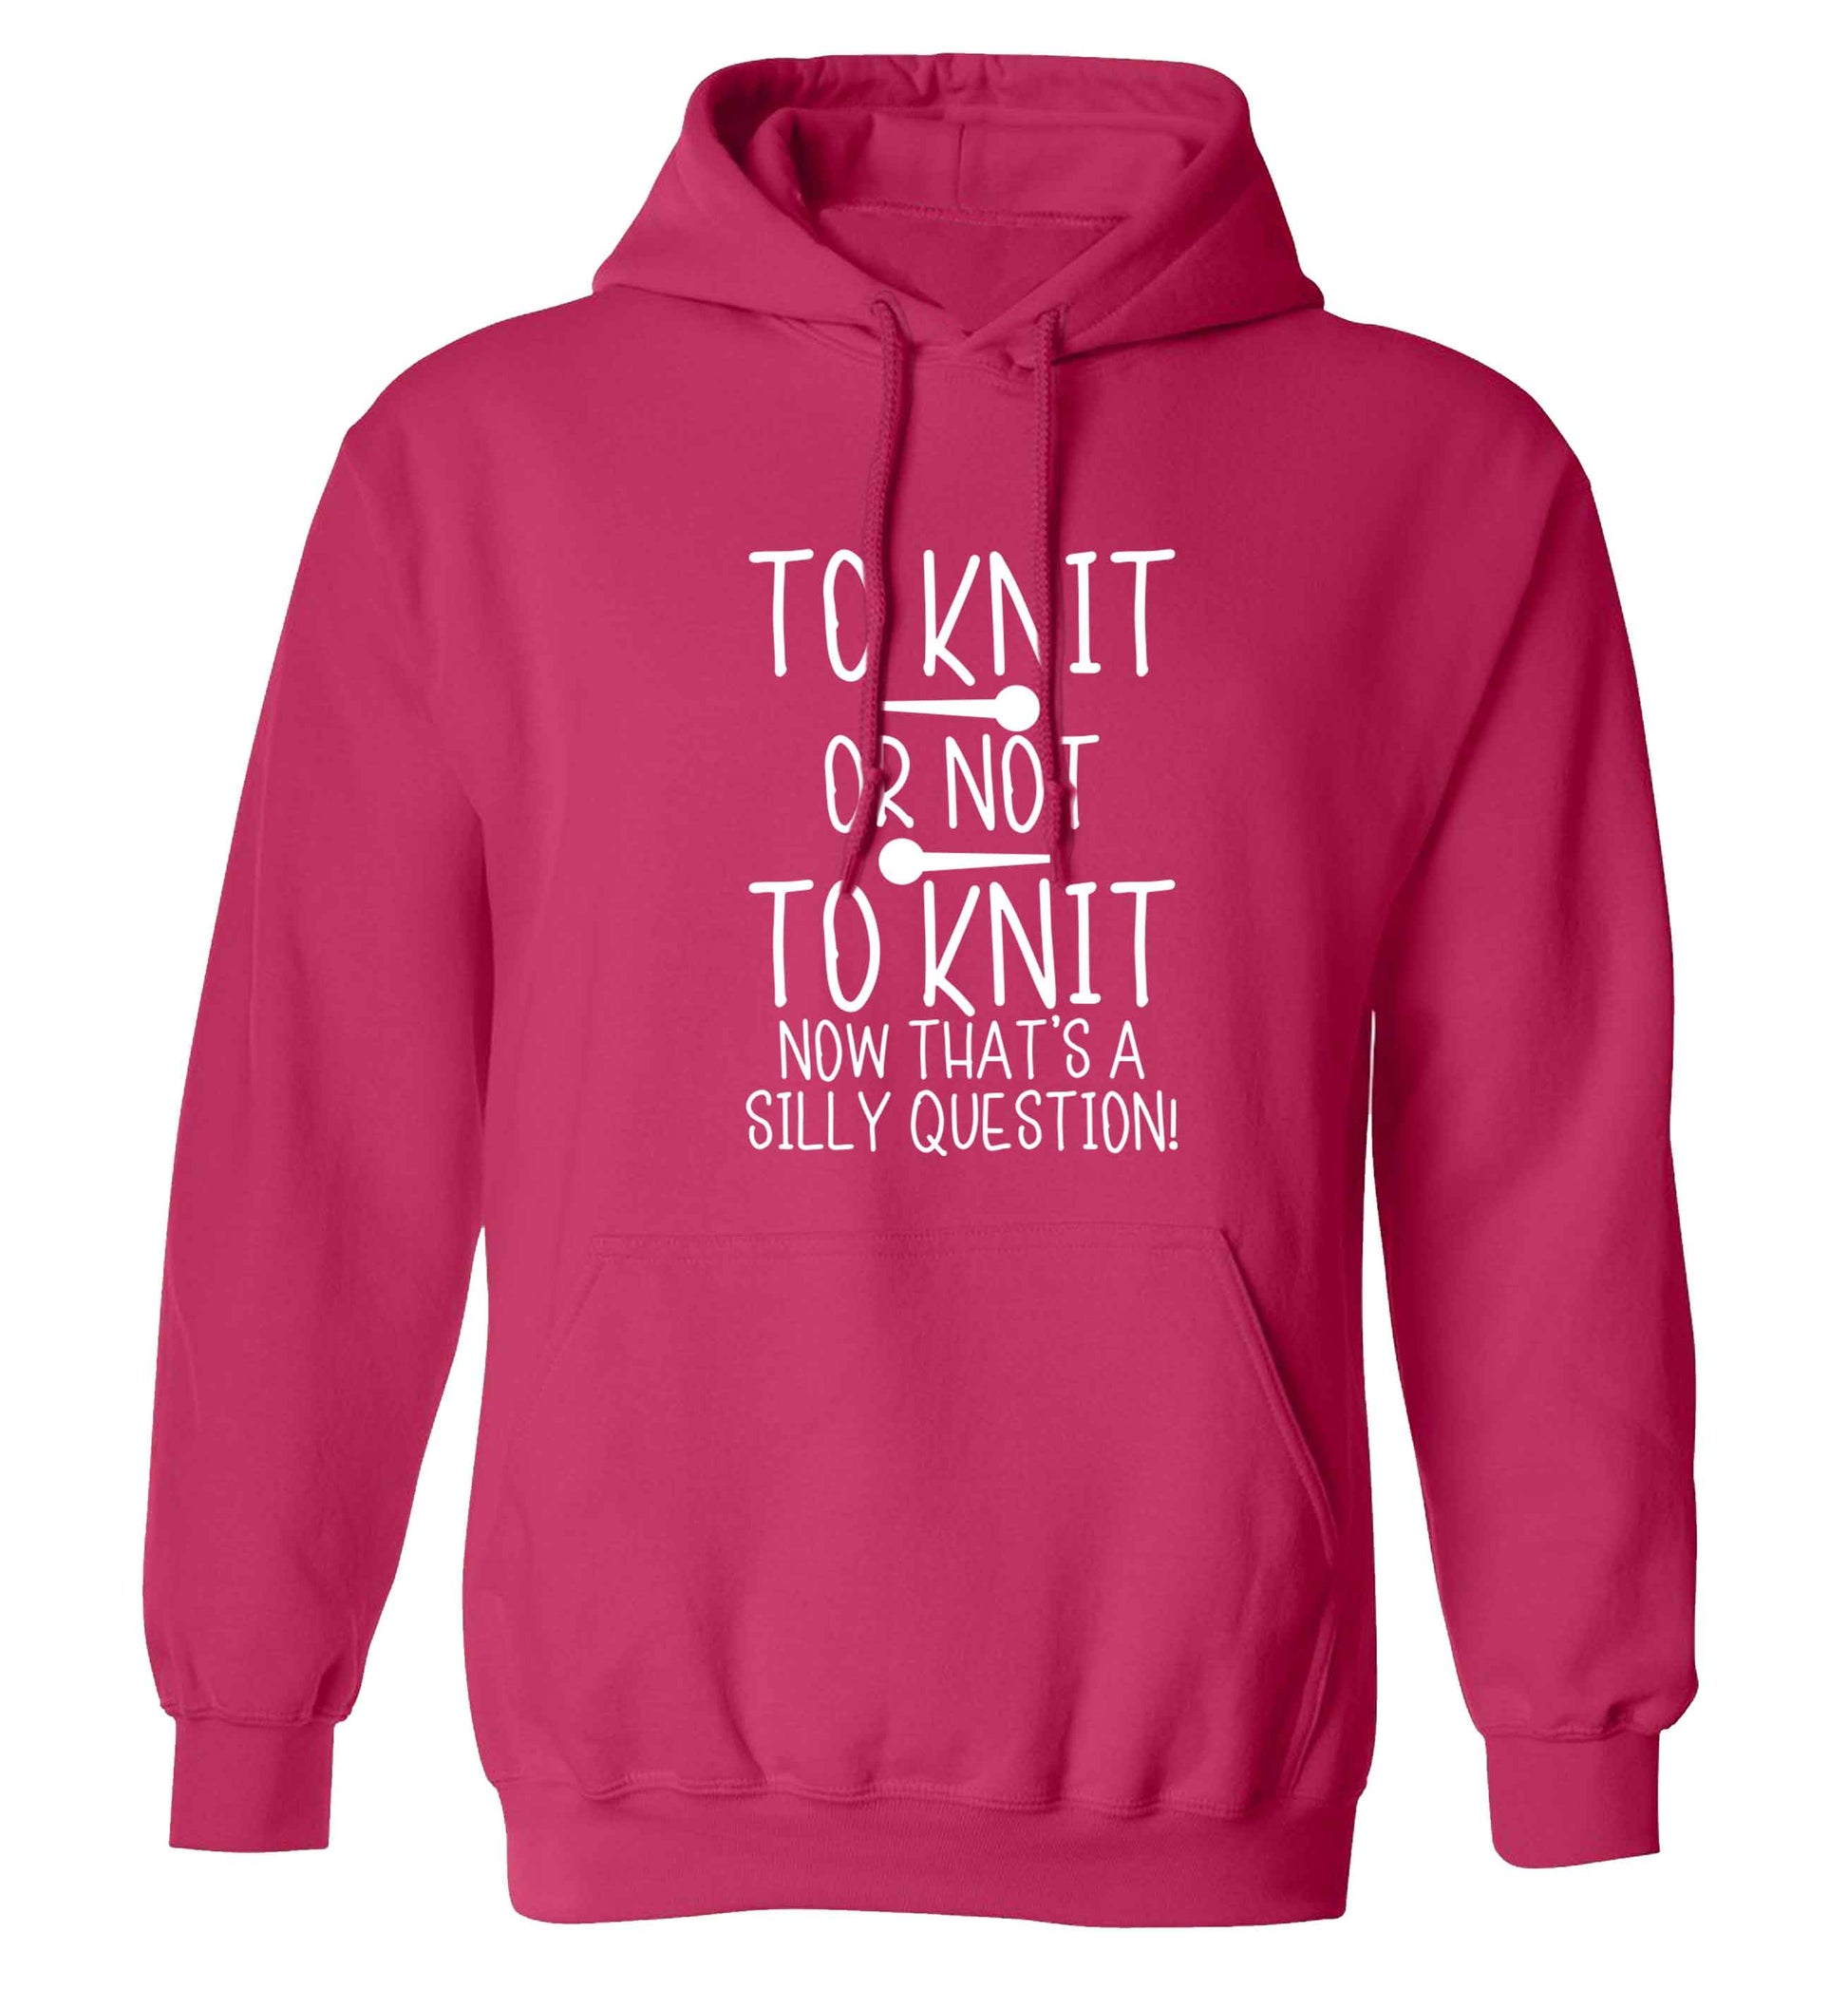 To knit or not to knit now that's a silly question adults unisex pink hoodie 2XL